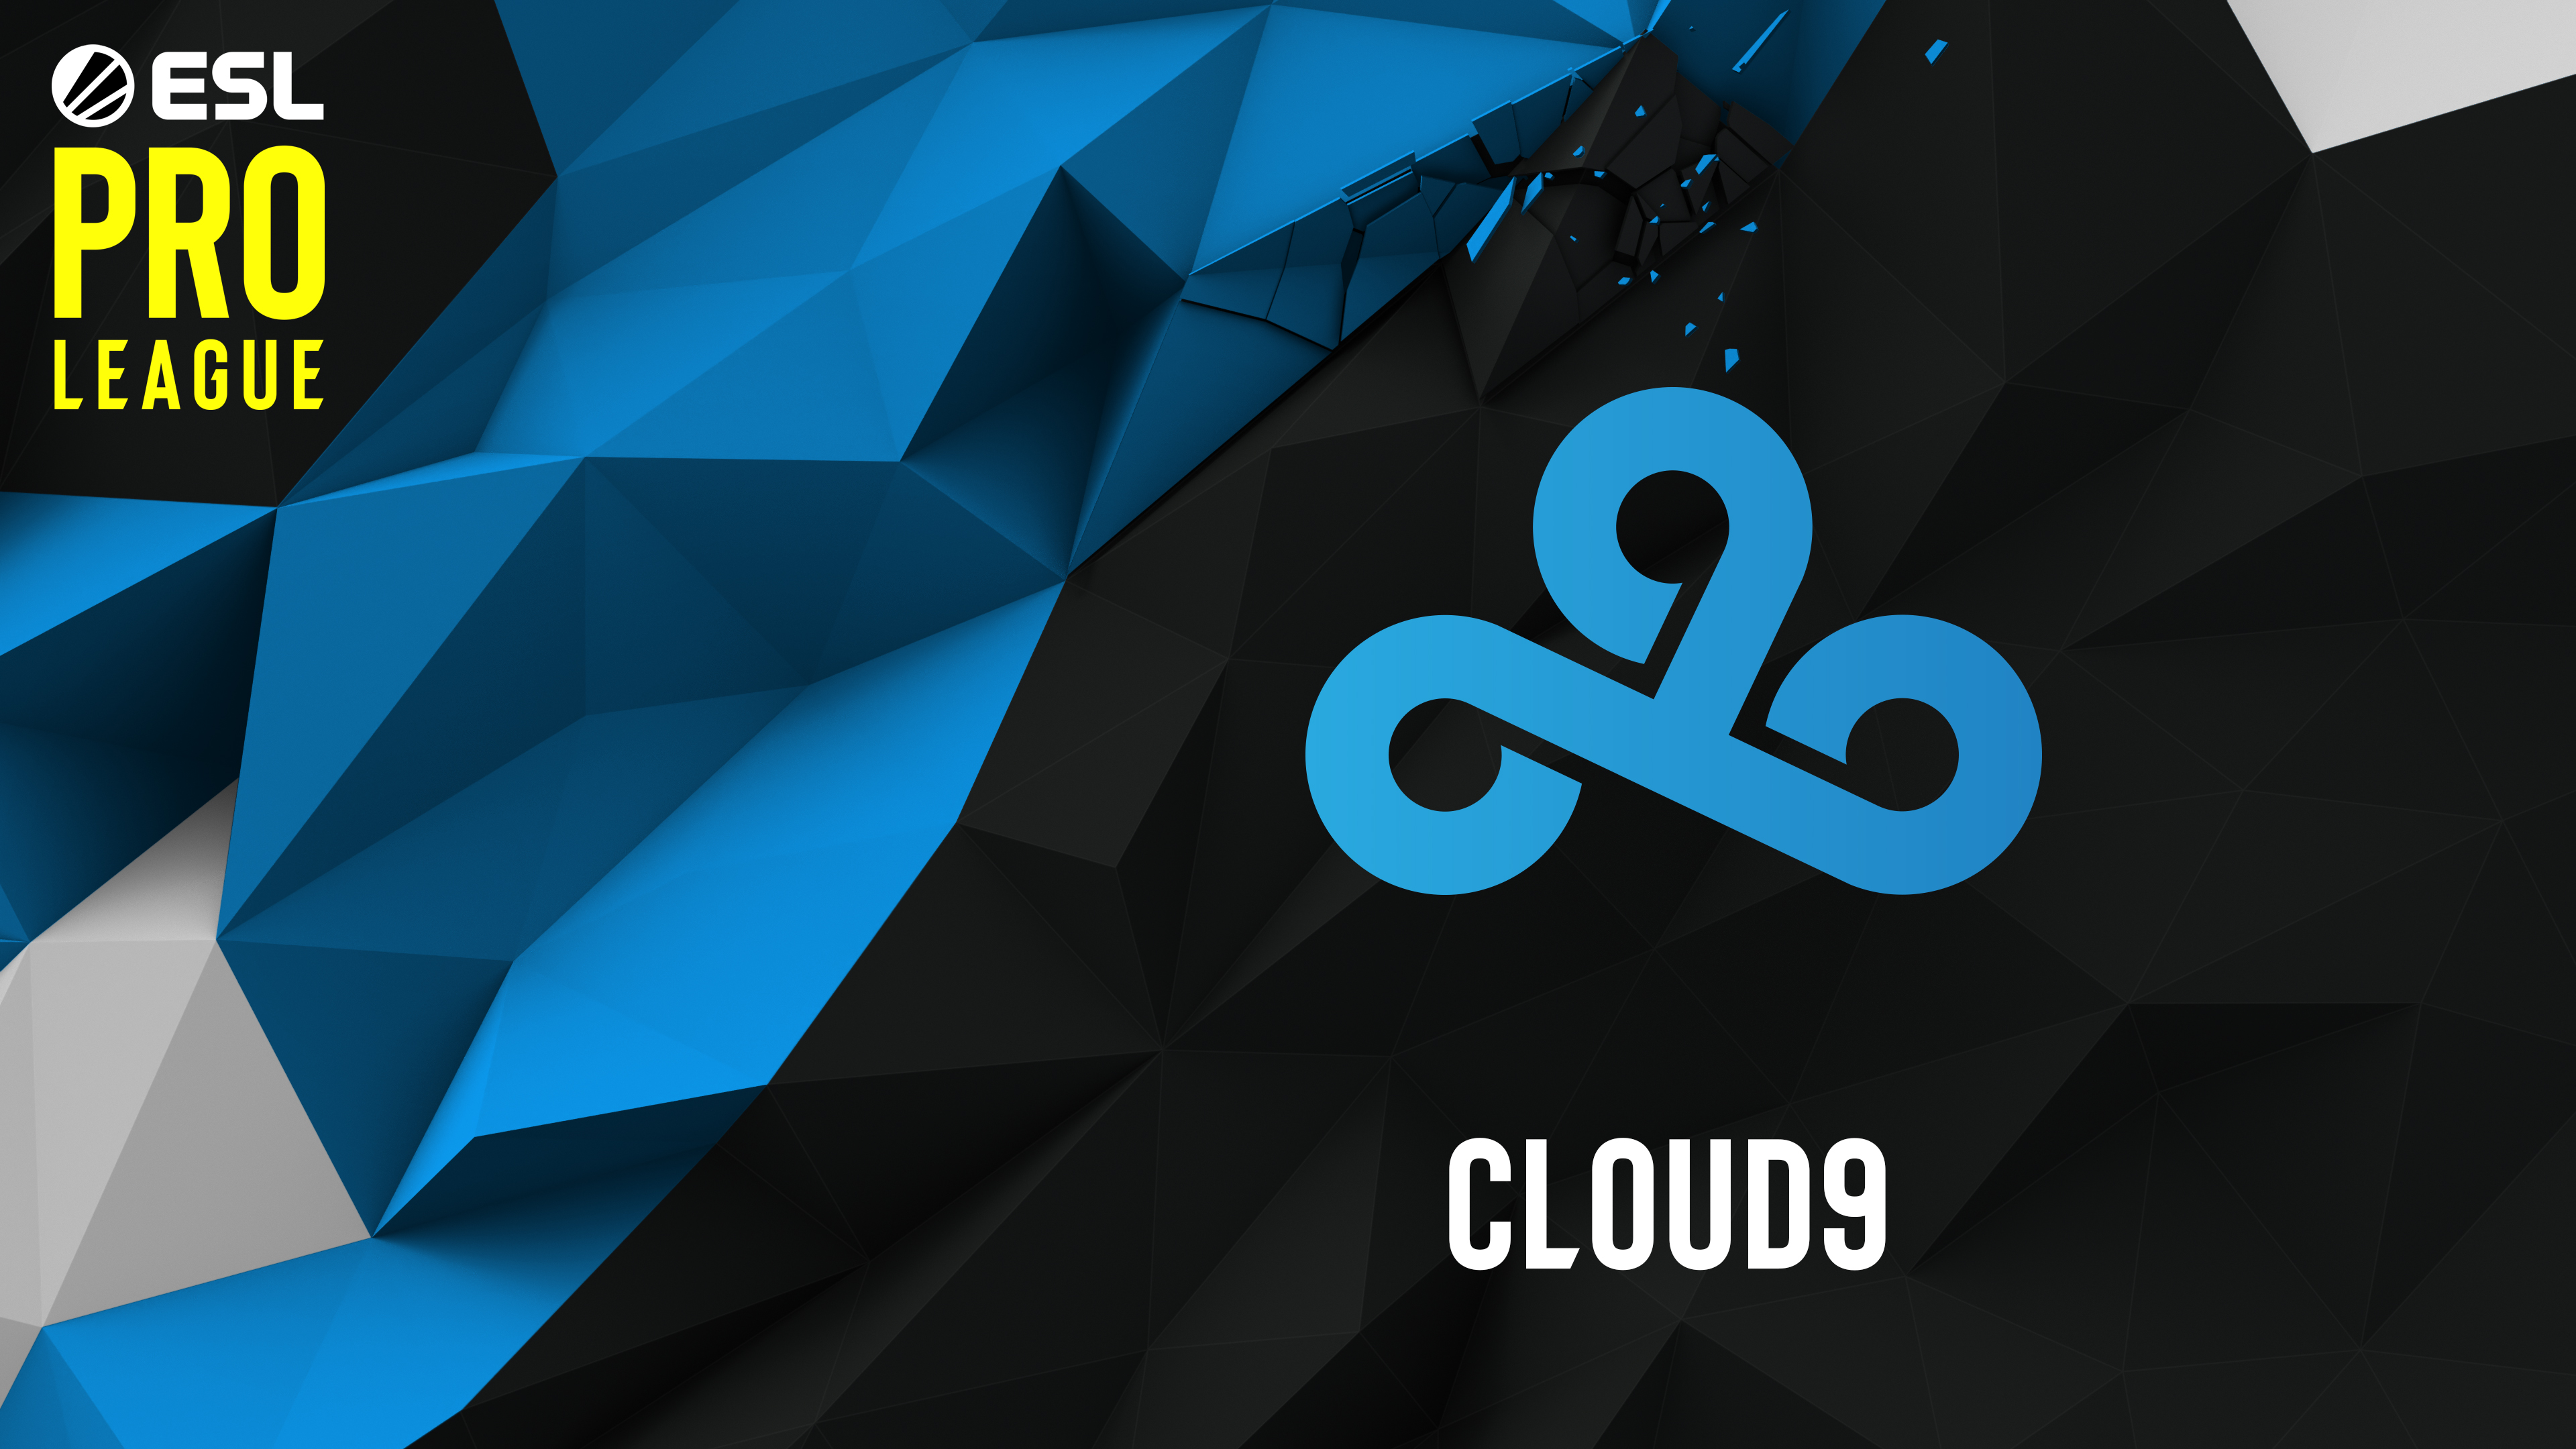 General 3840x2160 Electronic Sports League Counter-Strike: Global Offensive poly Pro Gaming cloud nine CGI Major League Gaming gaming series video games logo